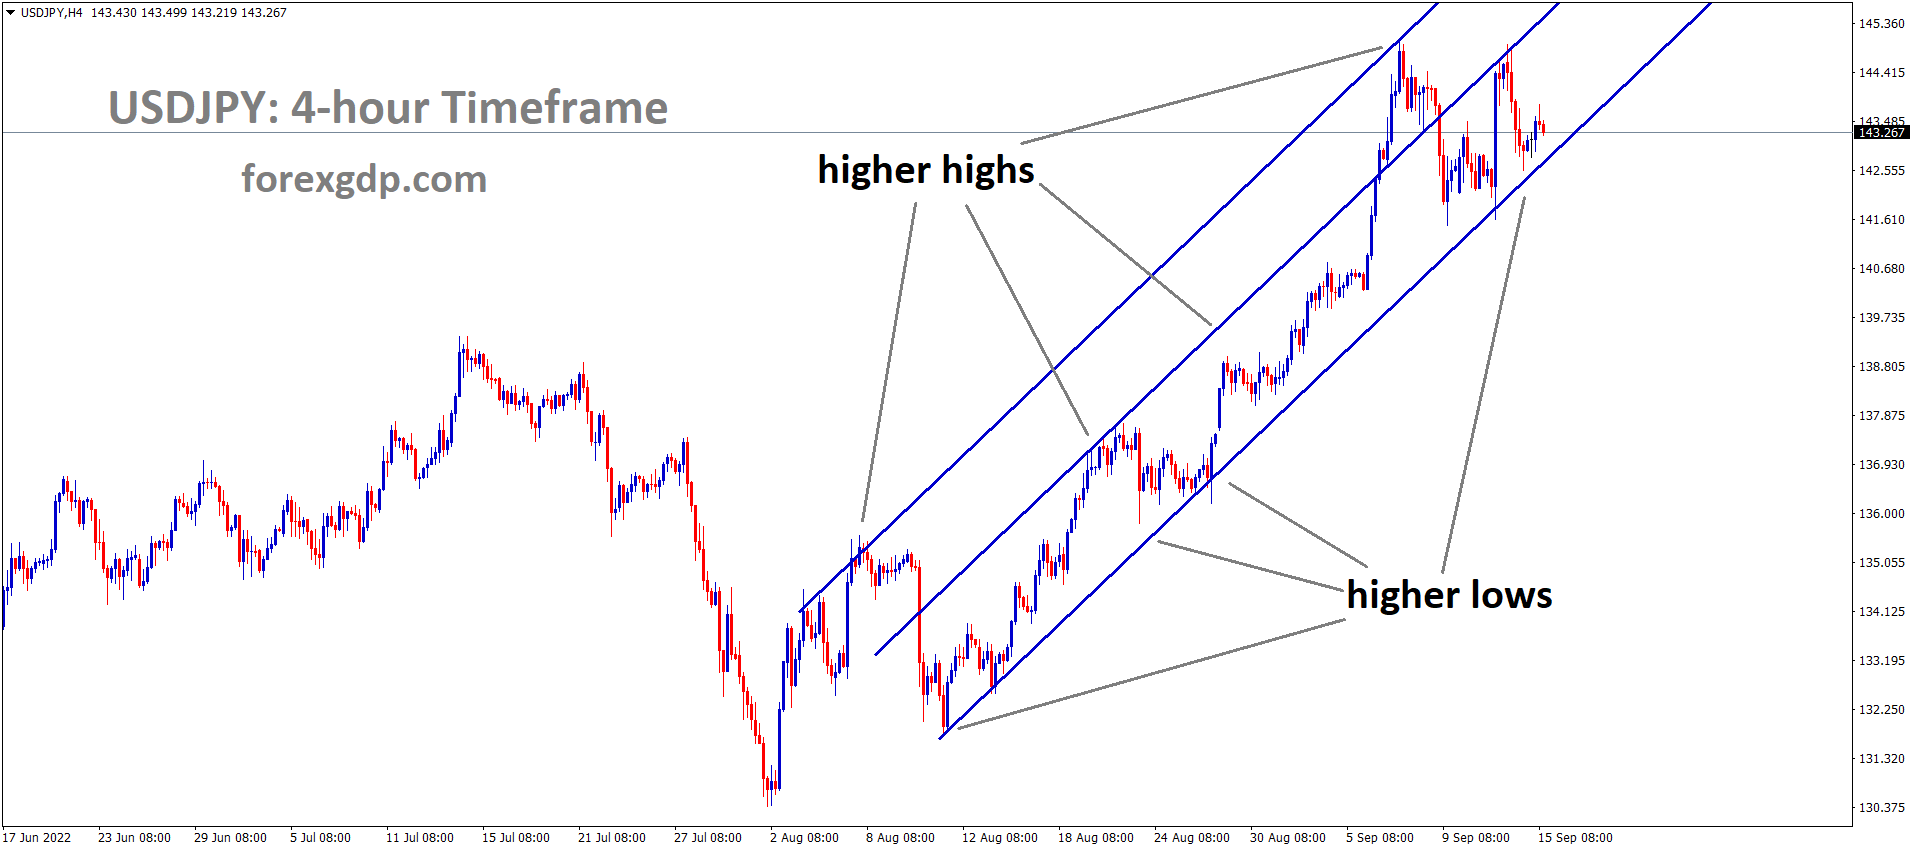 USDJPY is moving in an ascending channel and the market has reached the higher low area of the channel 2